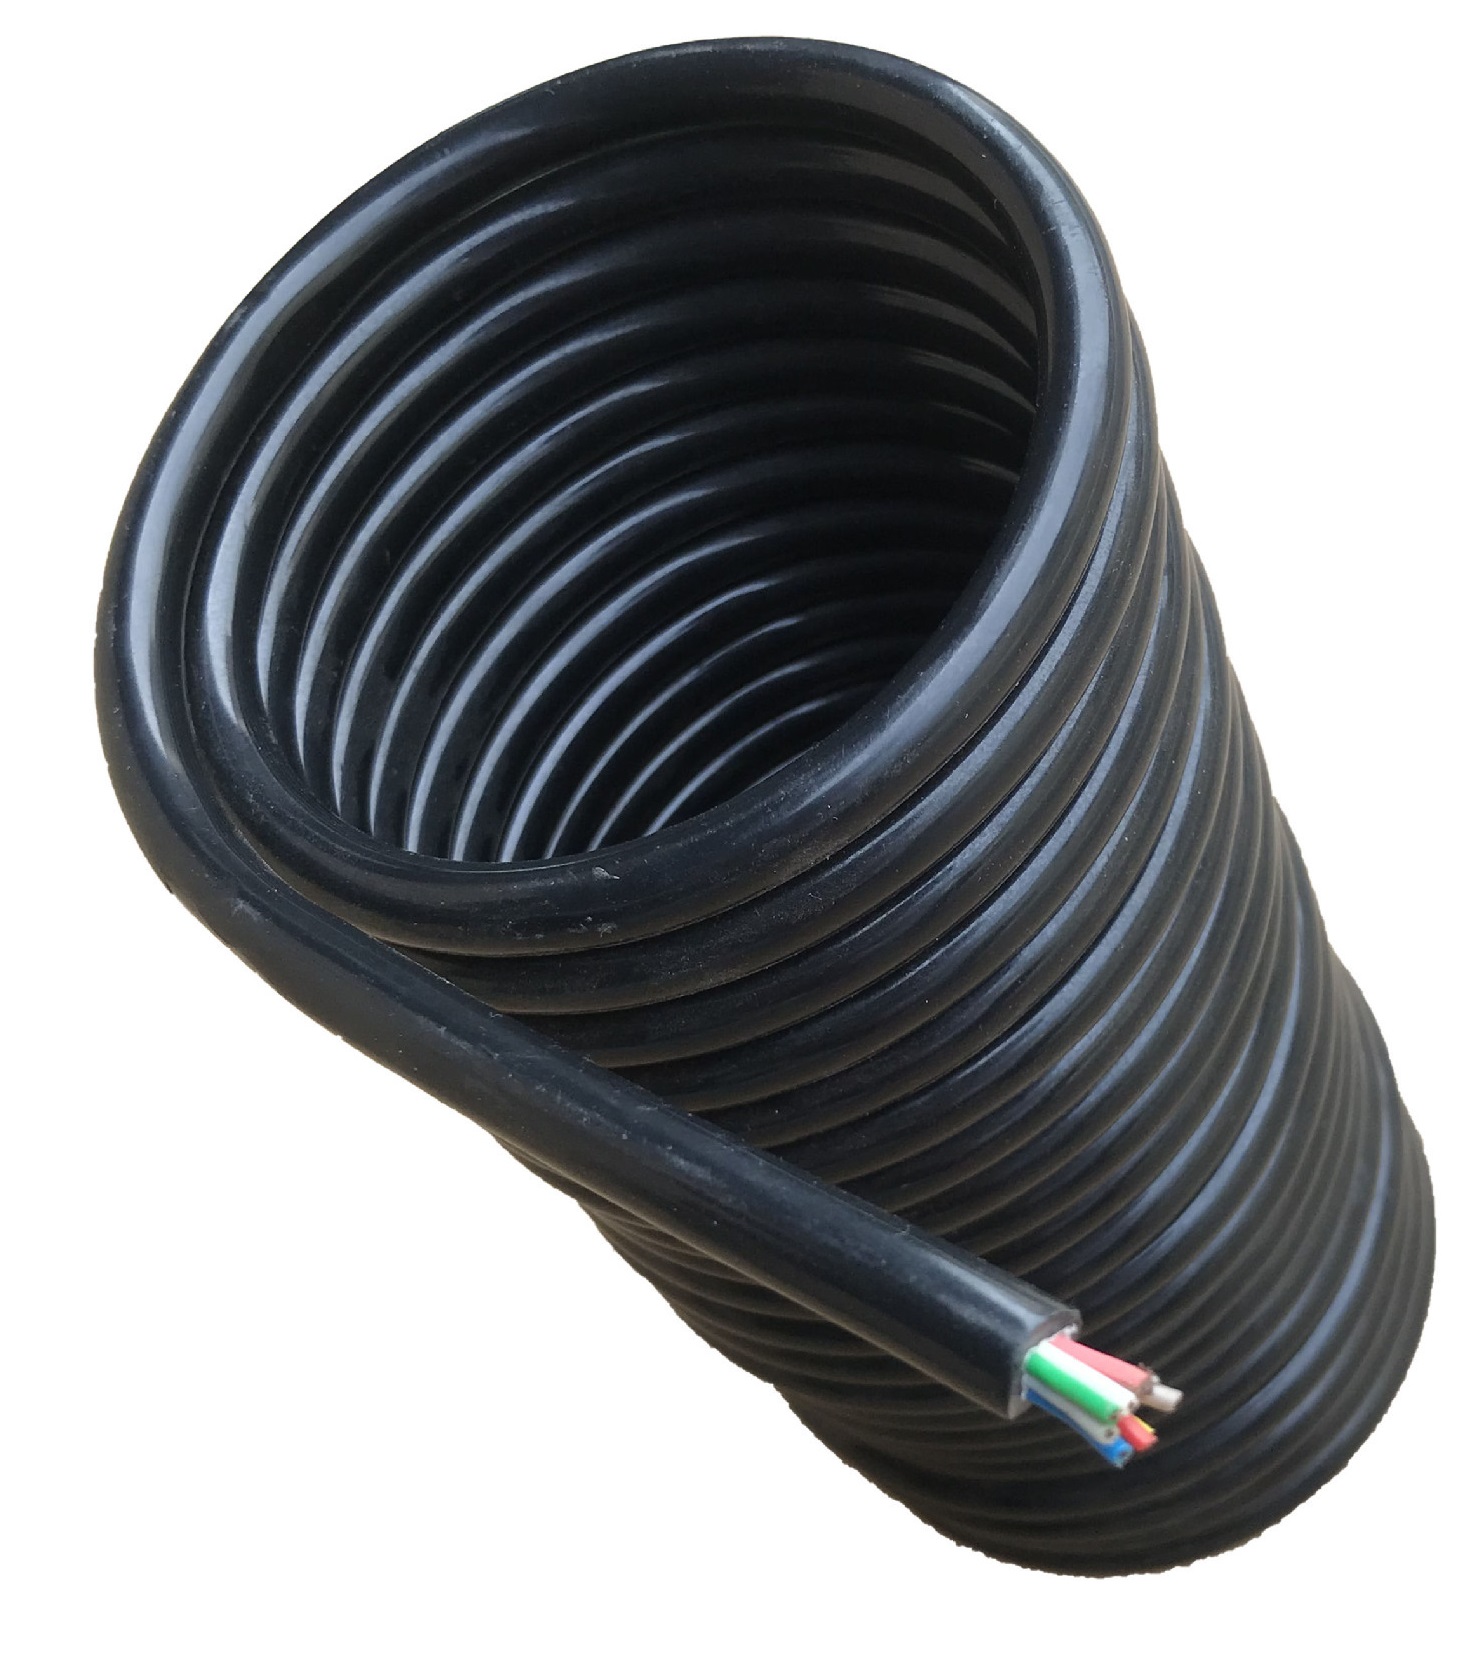 Spiral Cable - Coiled Cables Latest Price, Manufacturers & Suppliers